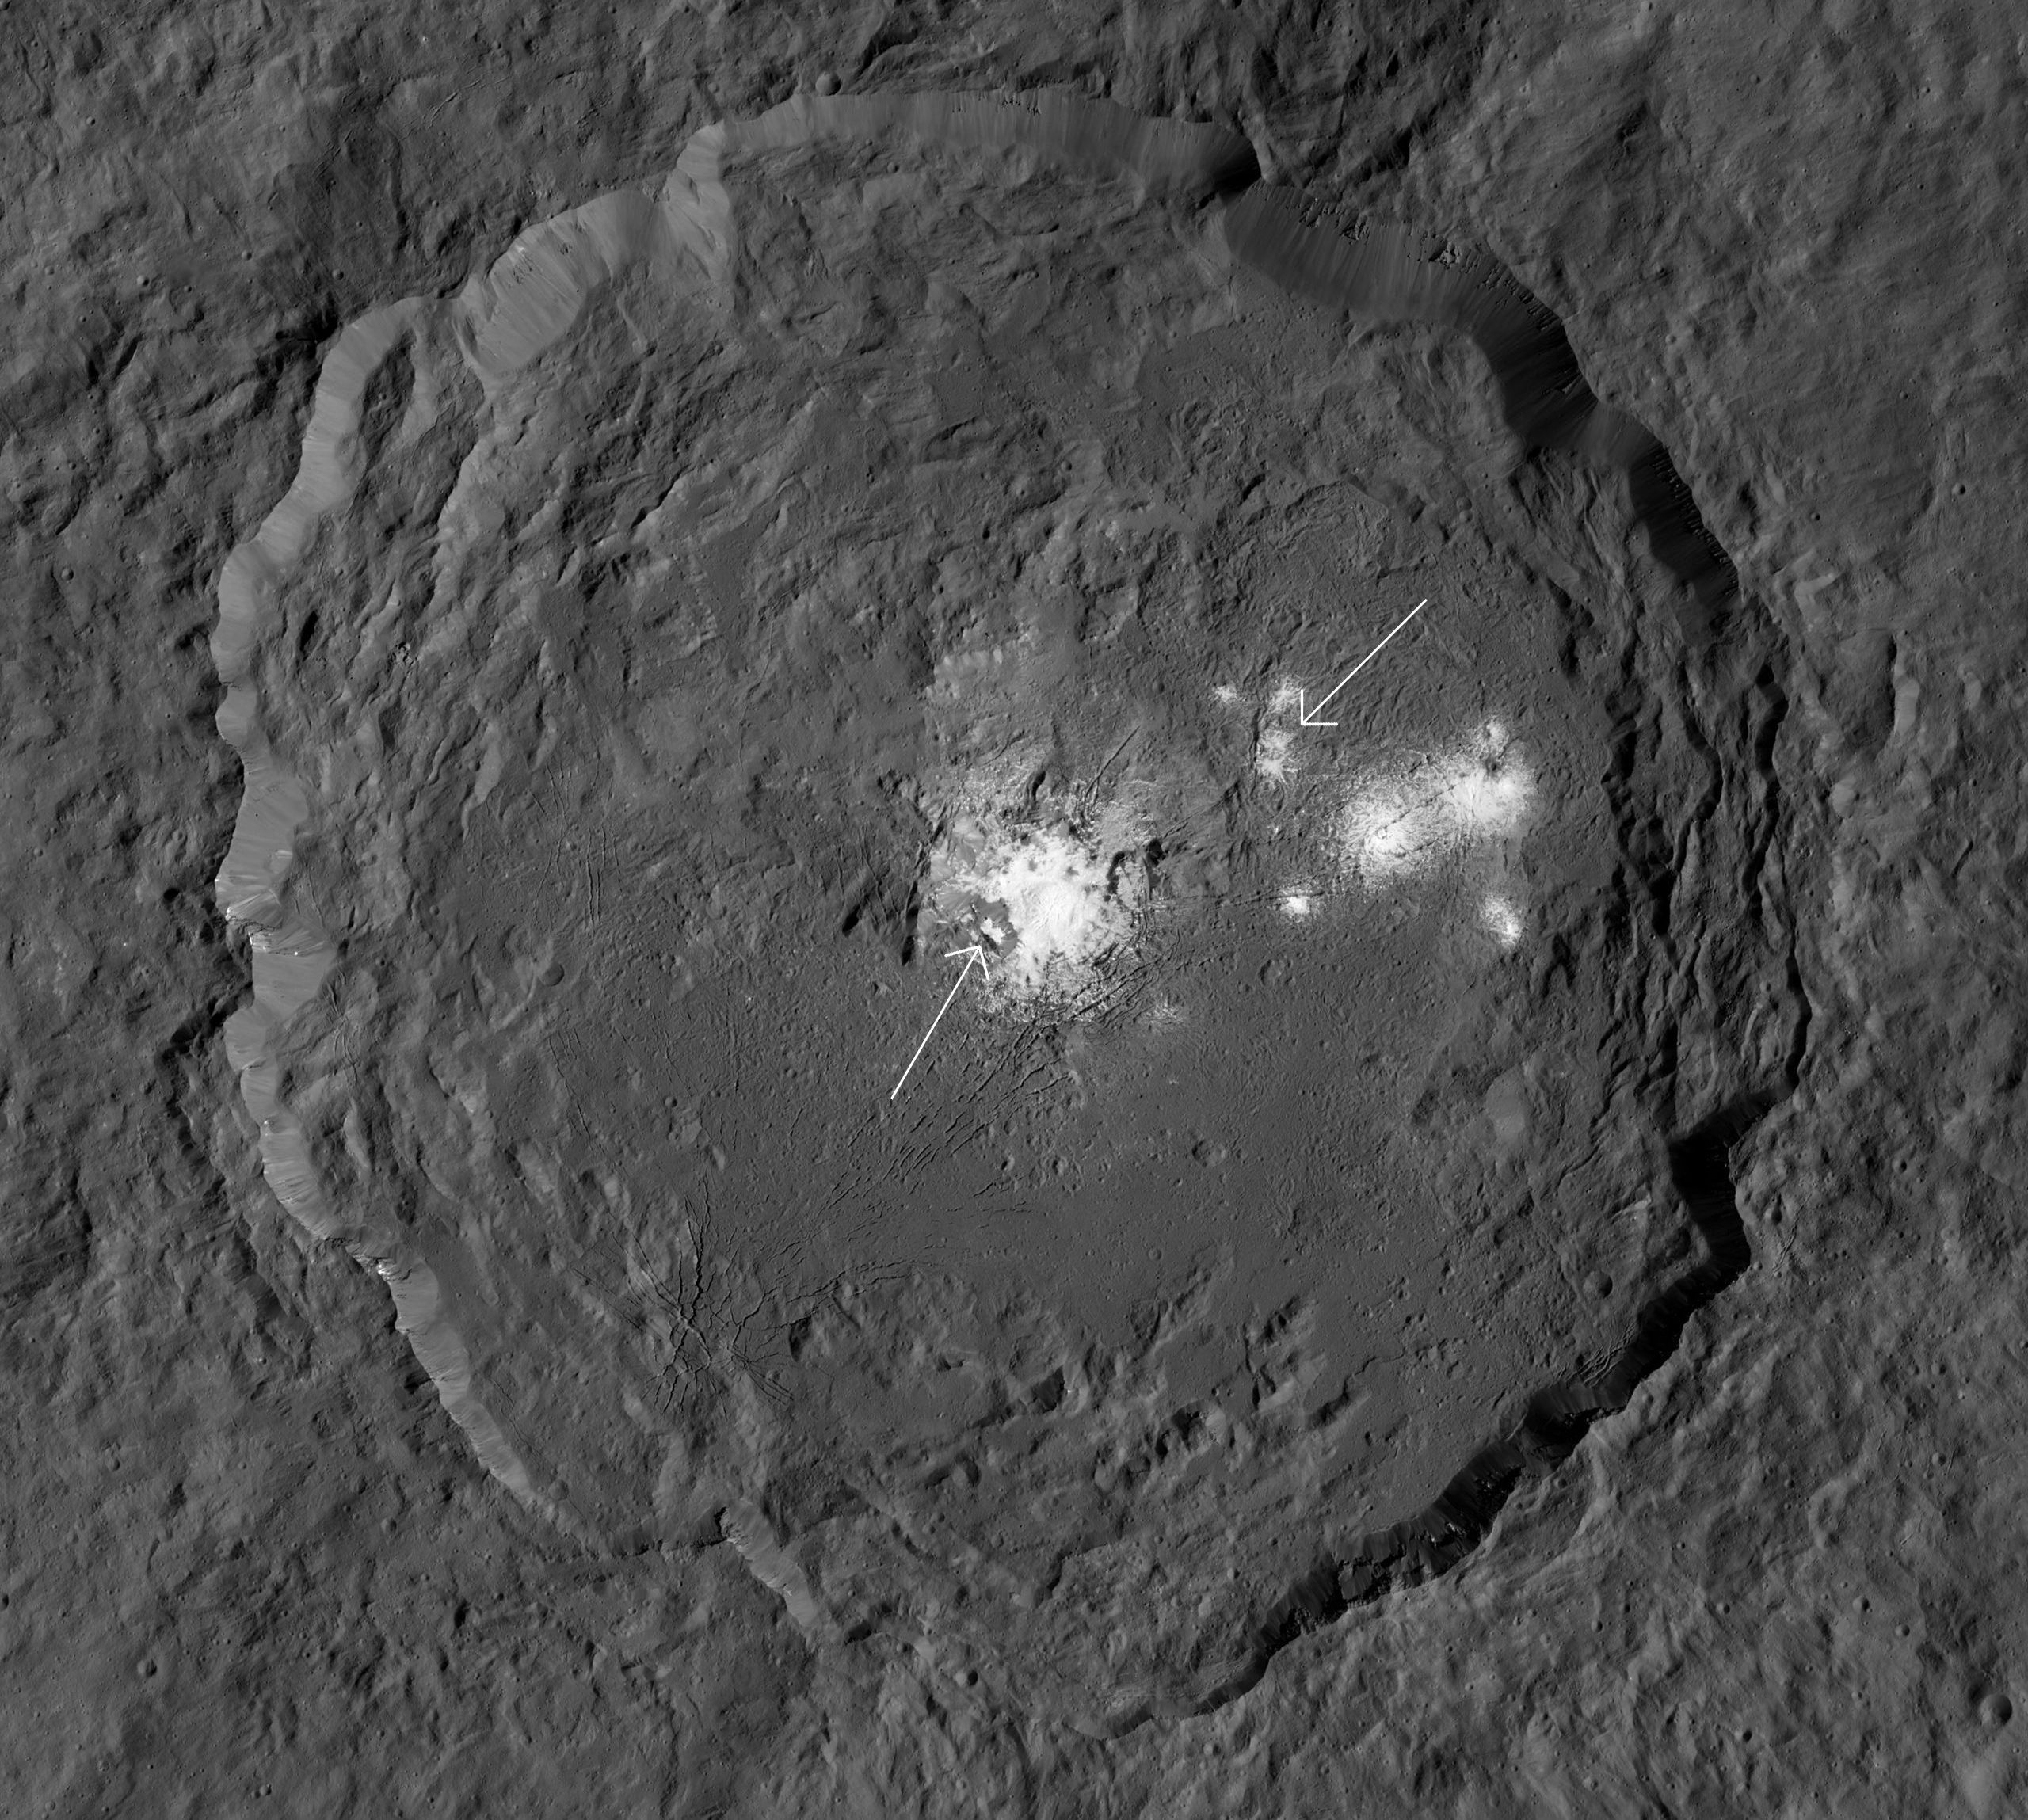 Occator crater, a 92-kilometer-wide impact feature on Ceres, is covered in mineral deposits dredged up from the interior. Cerealia Facula is arrowed (left) as well as Vinalia Faculae (right). Credit: NASA/JPL-Caltech/UCLA/MPS/DLR/IDA/PSI / Phil Plait